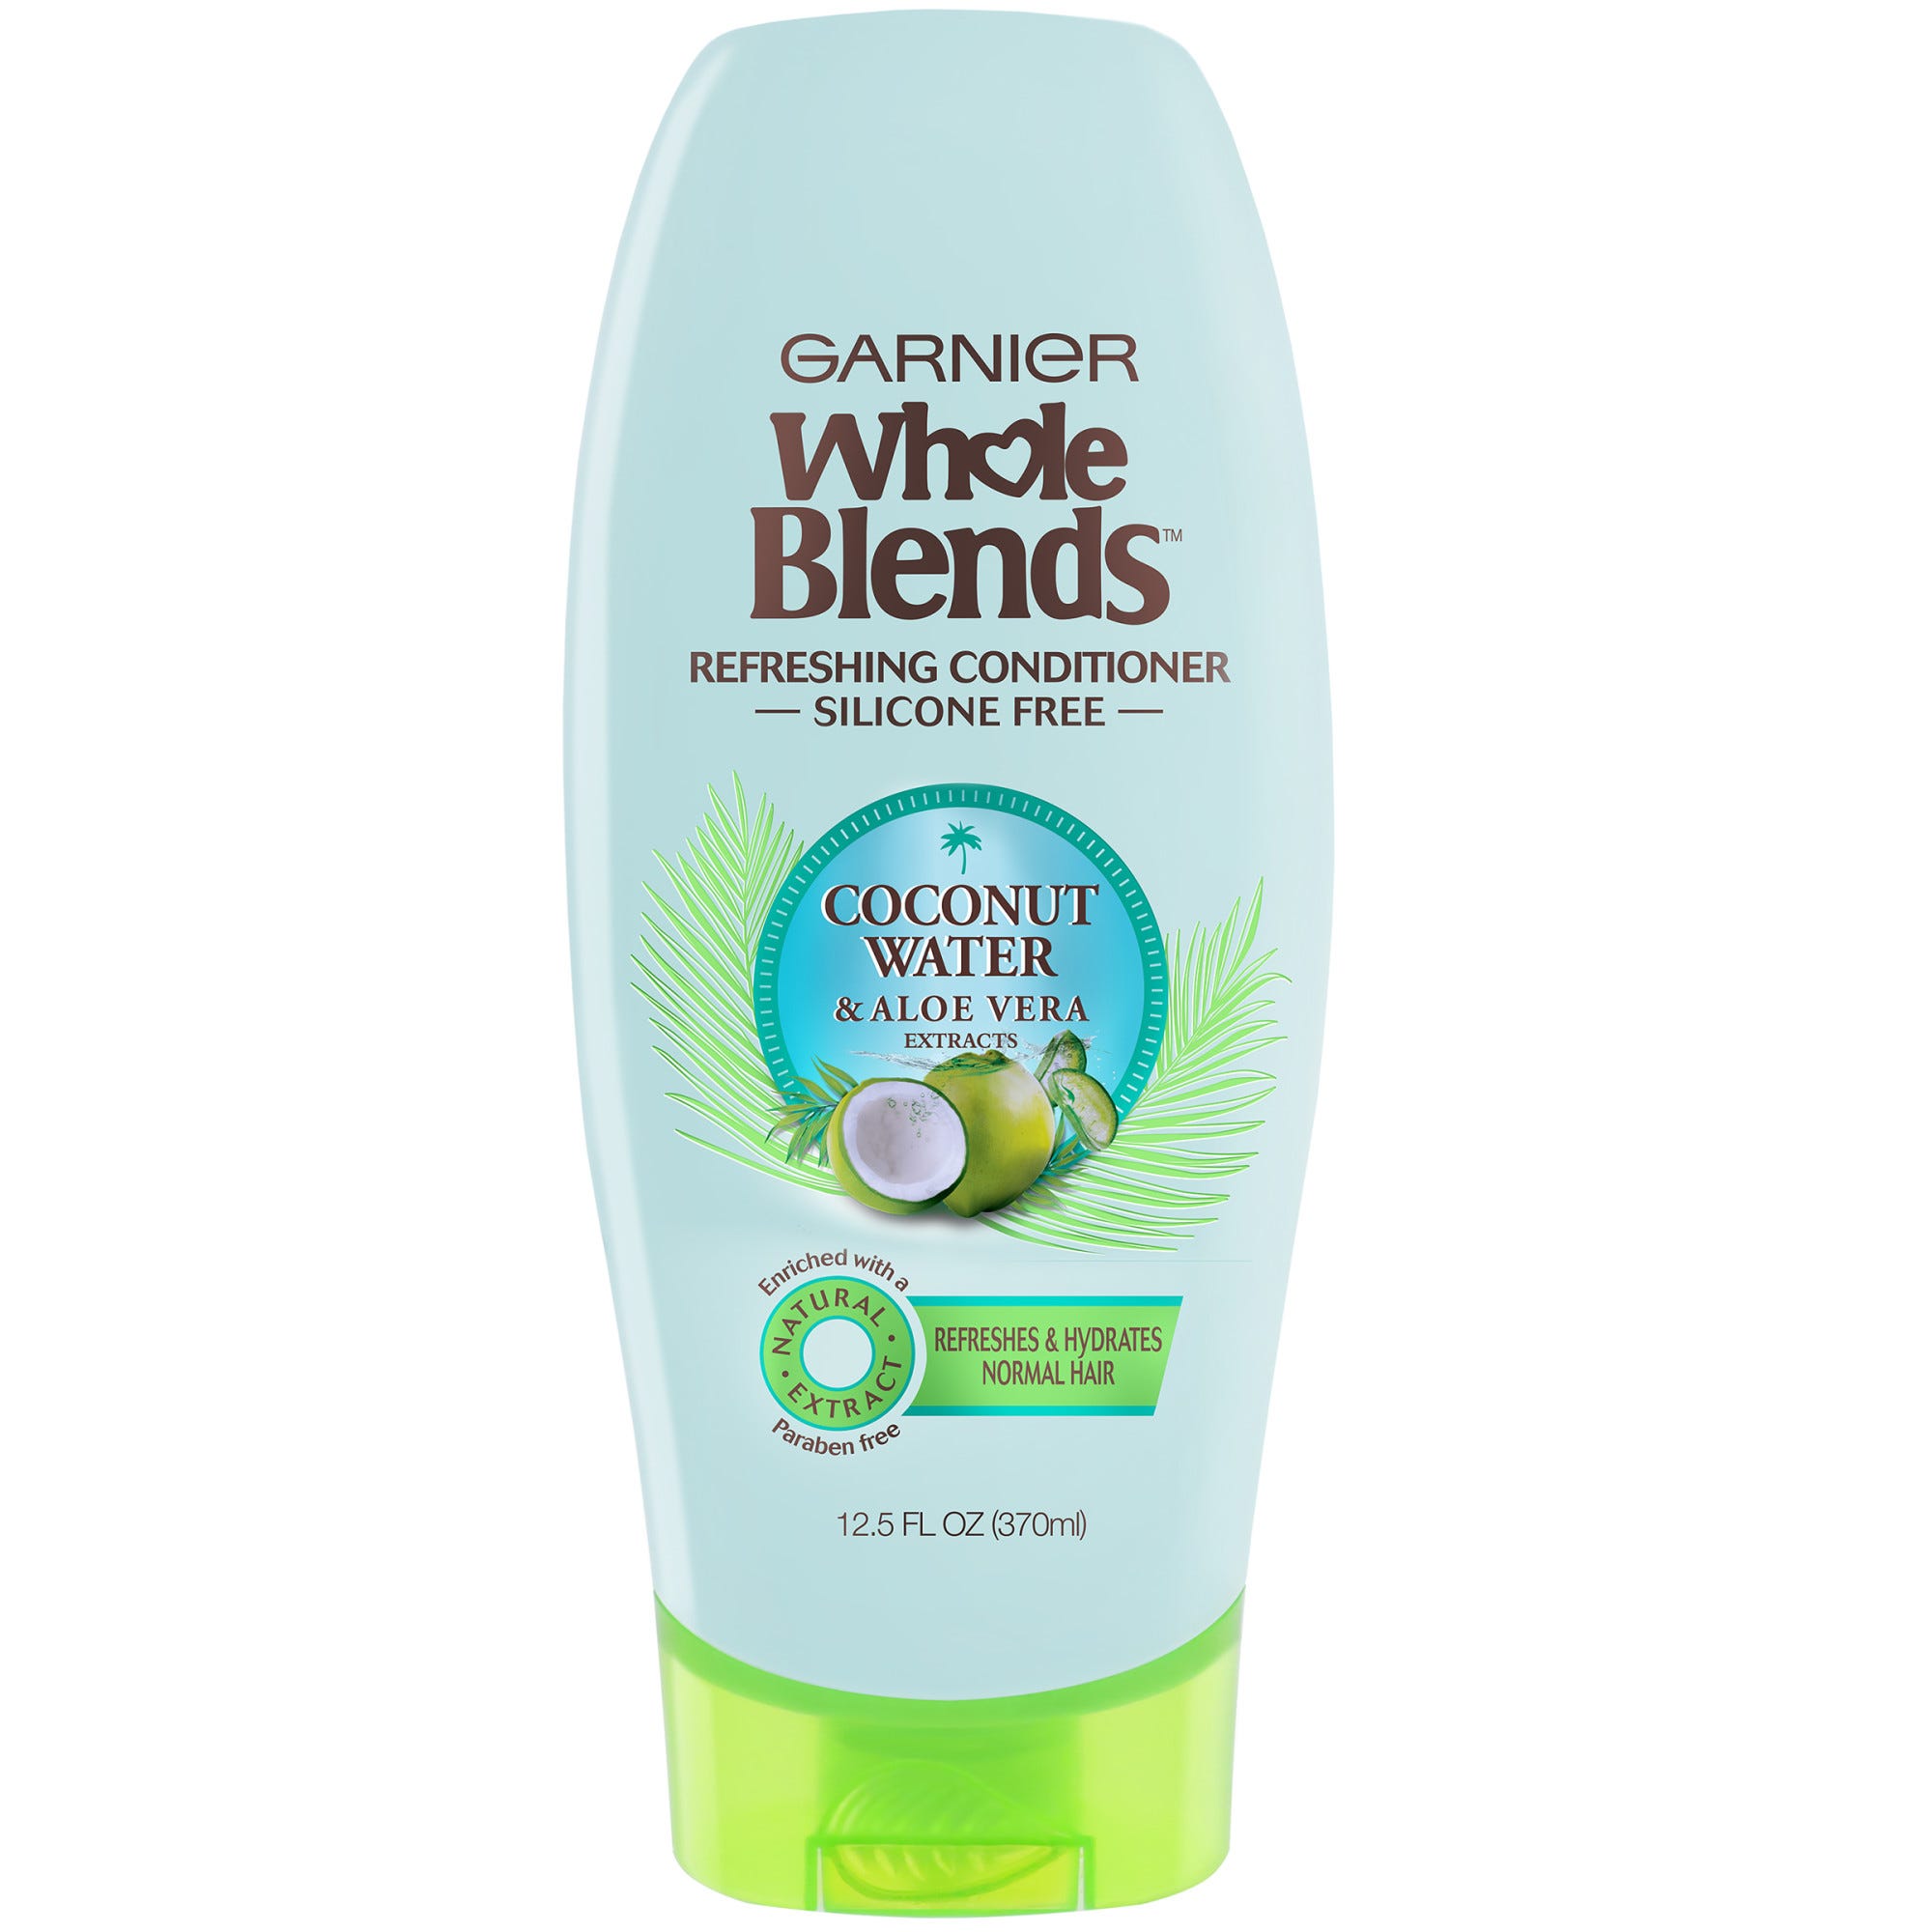 Garnier Whole Blends Hydrating Conditioner with Coconut Water & Aloe Vera Extract - 12.5 fl oz